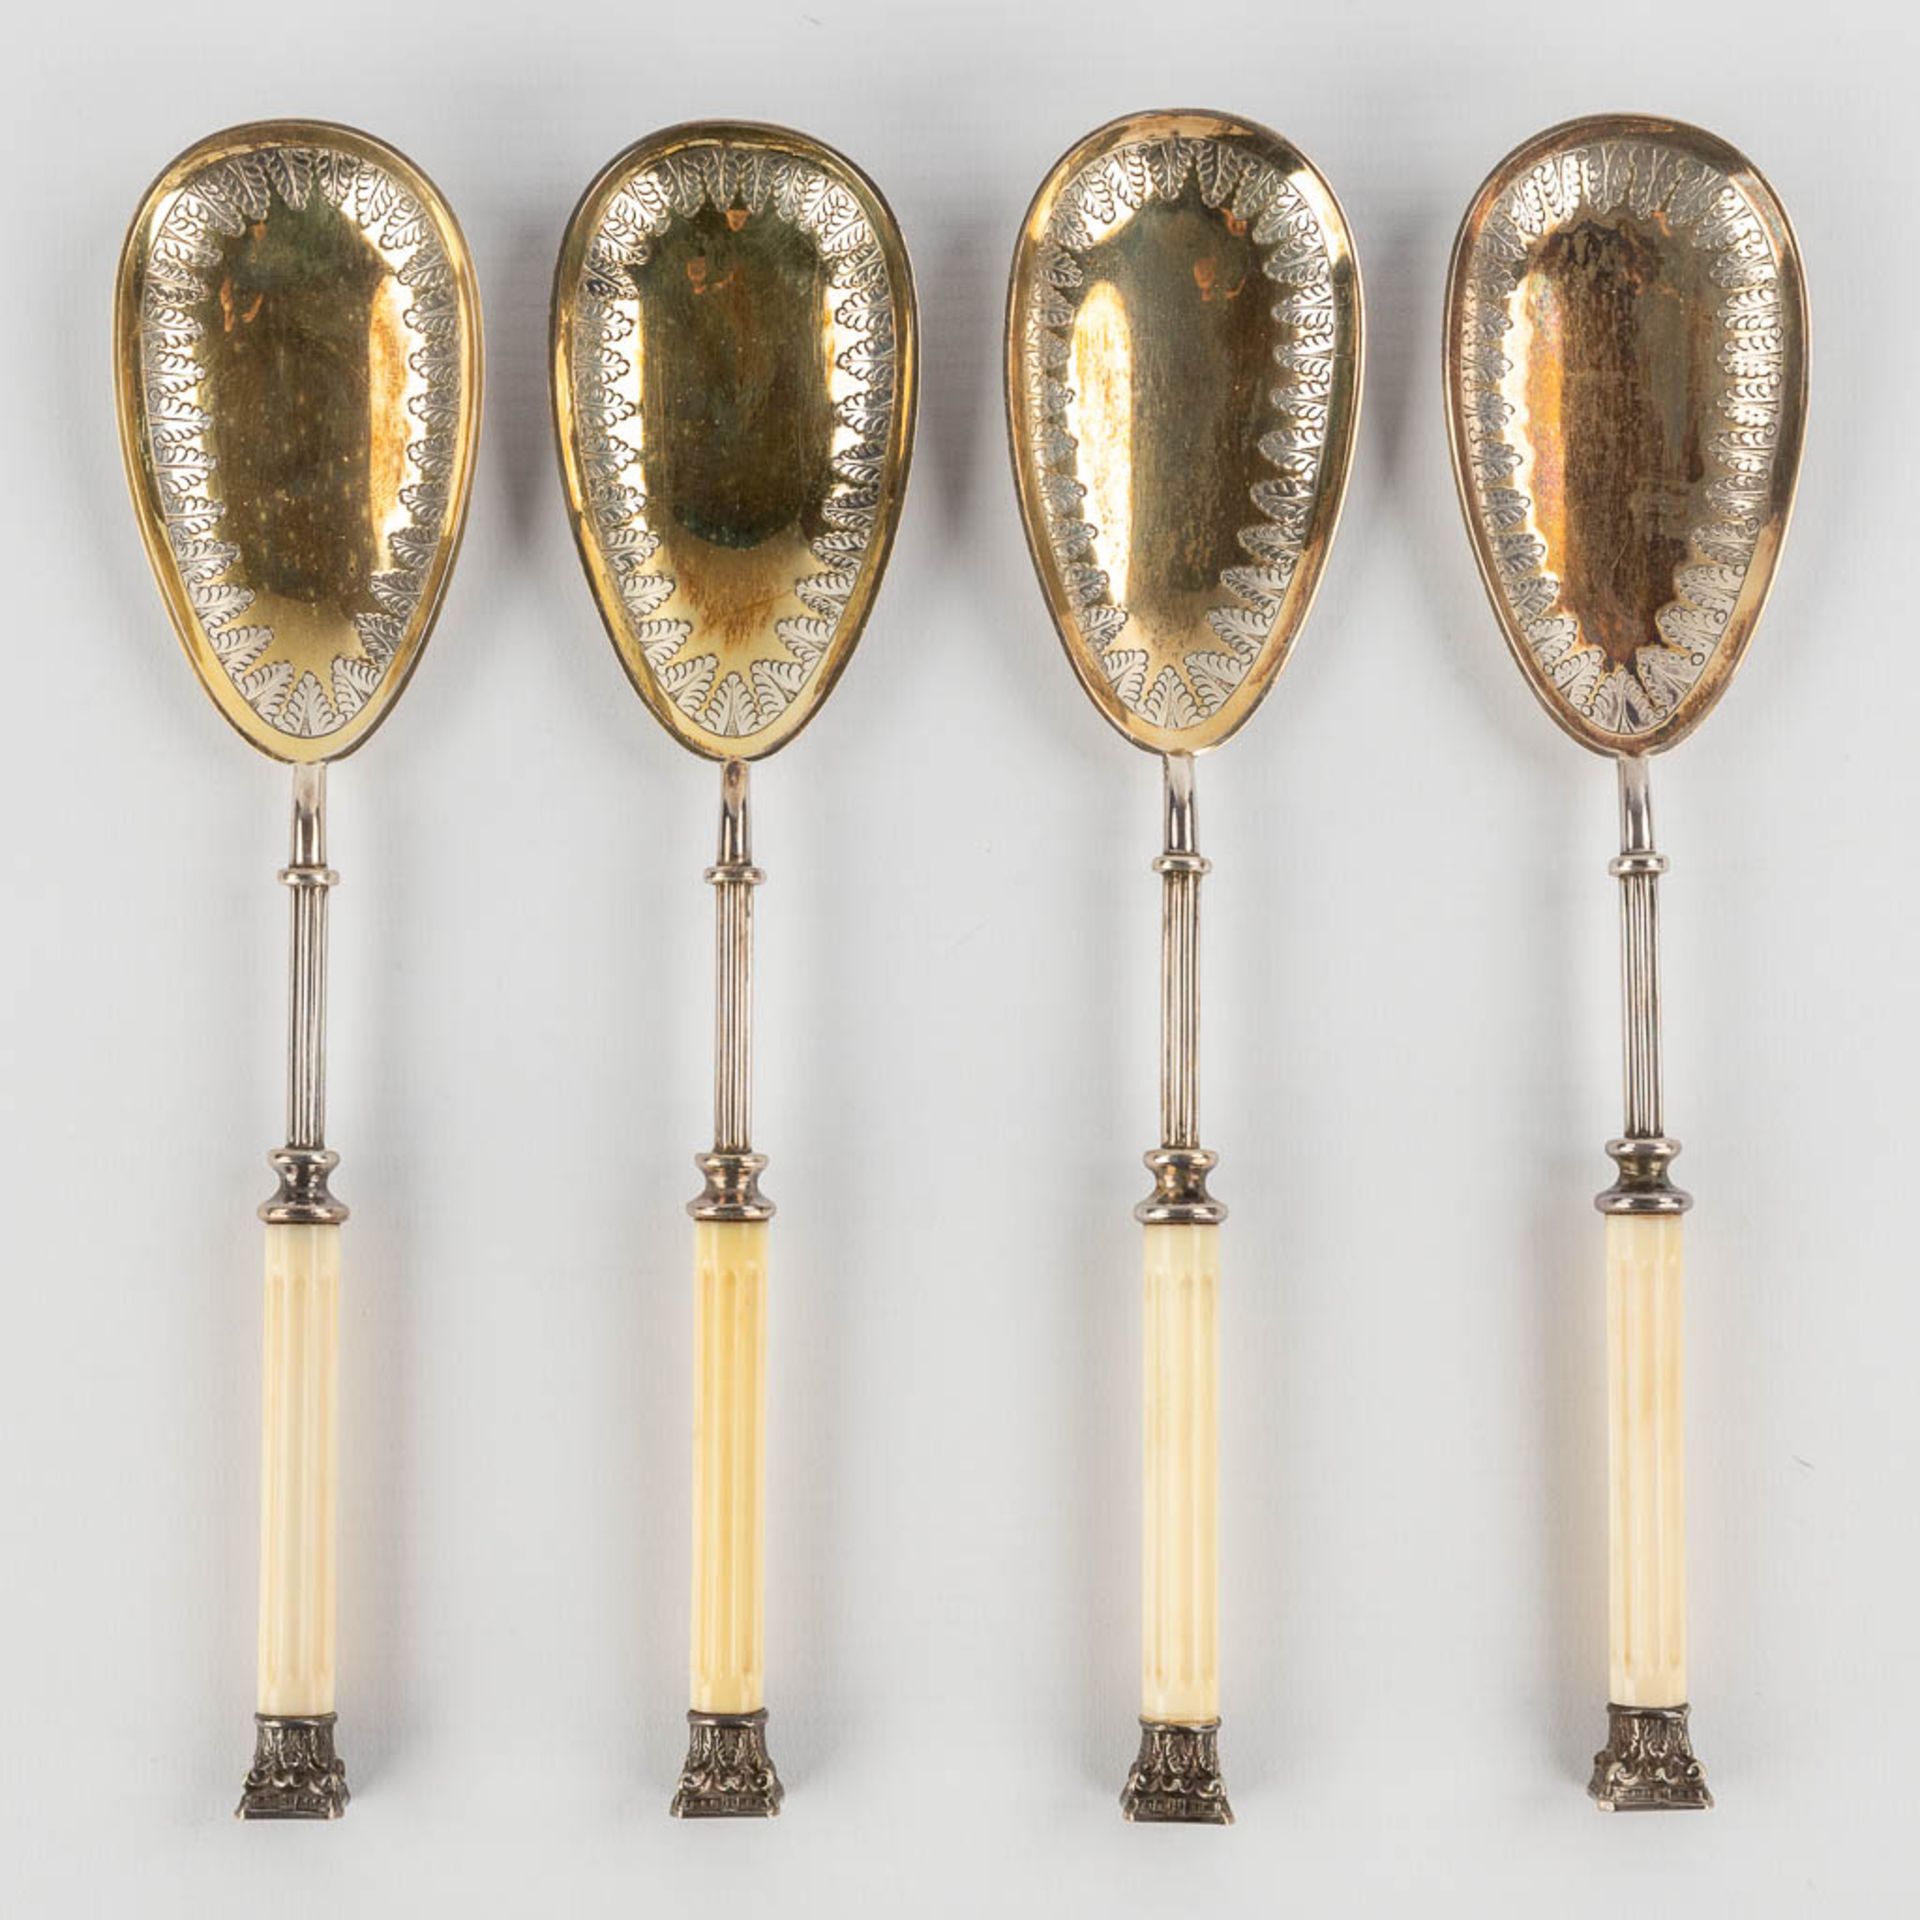 Martin Hall &amp; Cie, a set of 4 silver-plated Victorian spoons. UK, 19th C. (W:23,5 cm) - Image 5 of 12